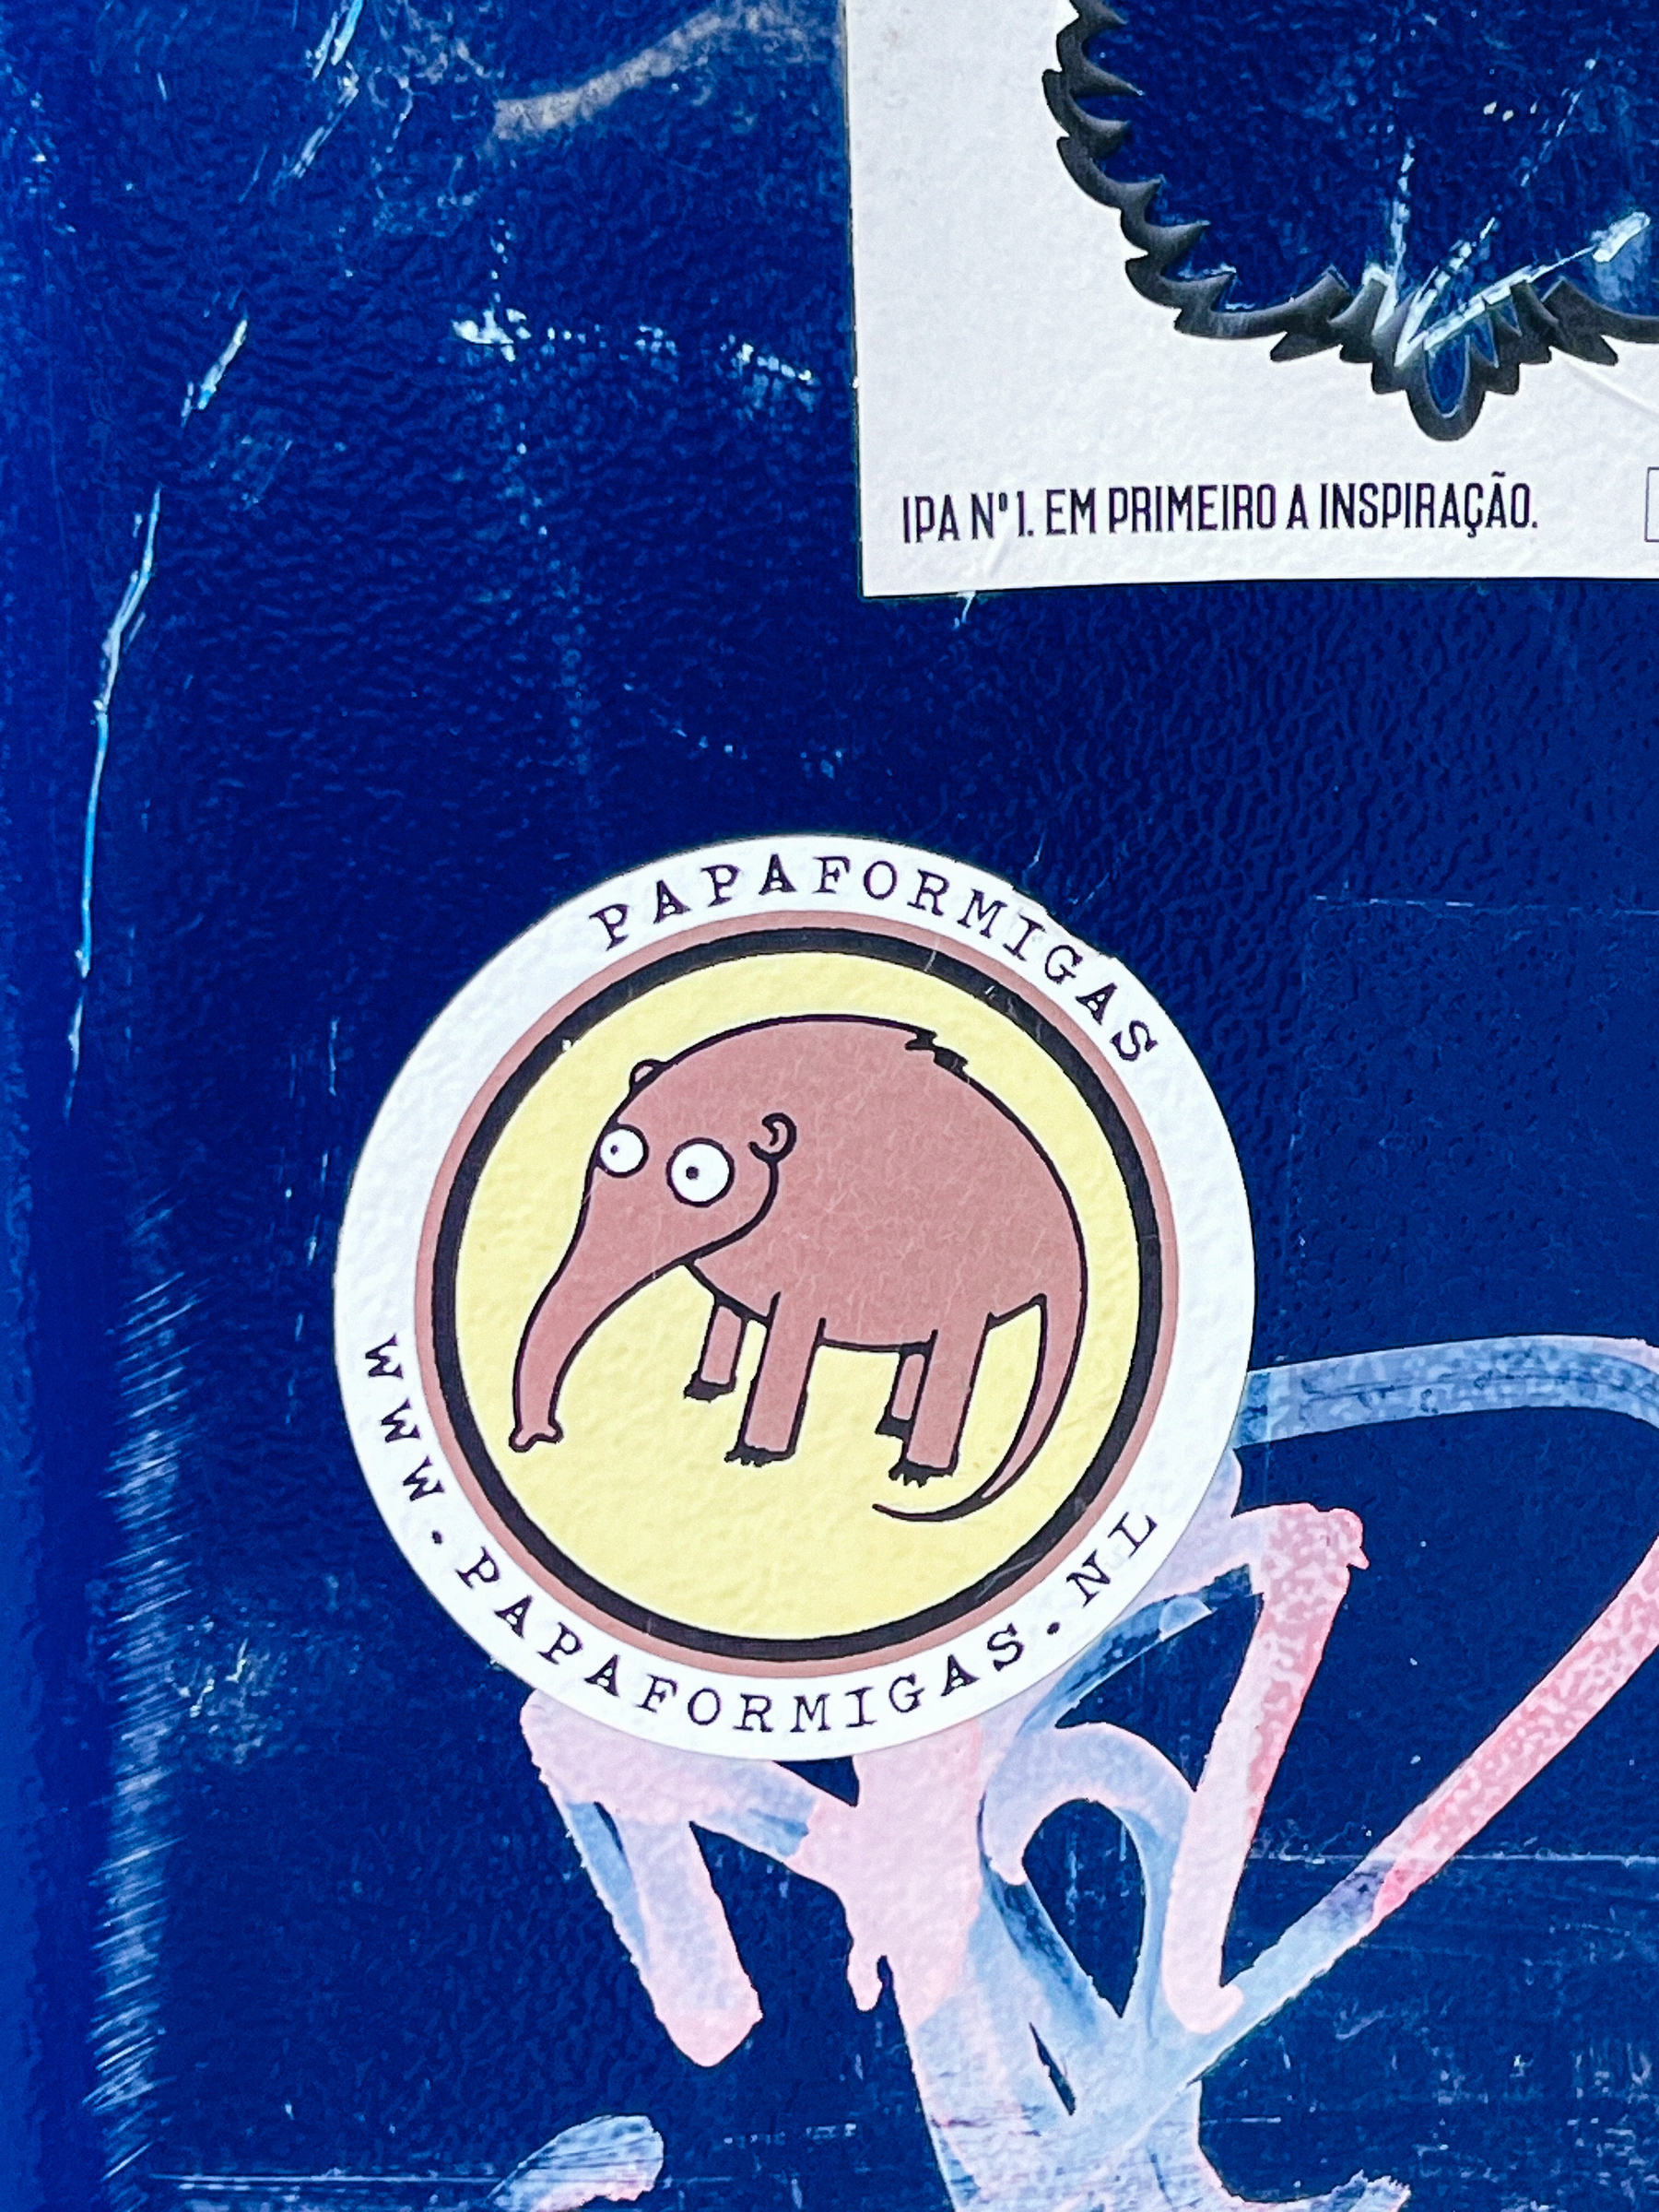 A sticker of a stylized anteater with &ldquo;PAPAFORMIGAS&rdquo; and &ldquo;WWW.PAPAFORMIGAS.NL&rdquo; is affixed to a blue surface with other graffiti.